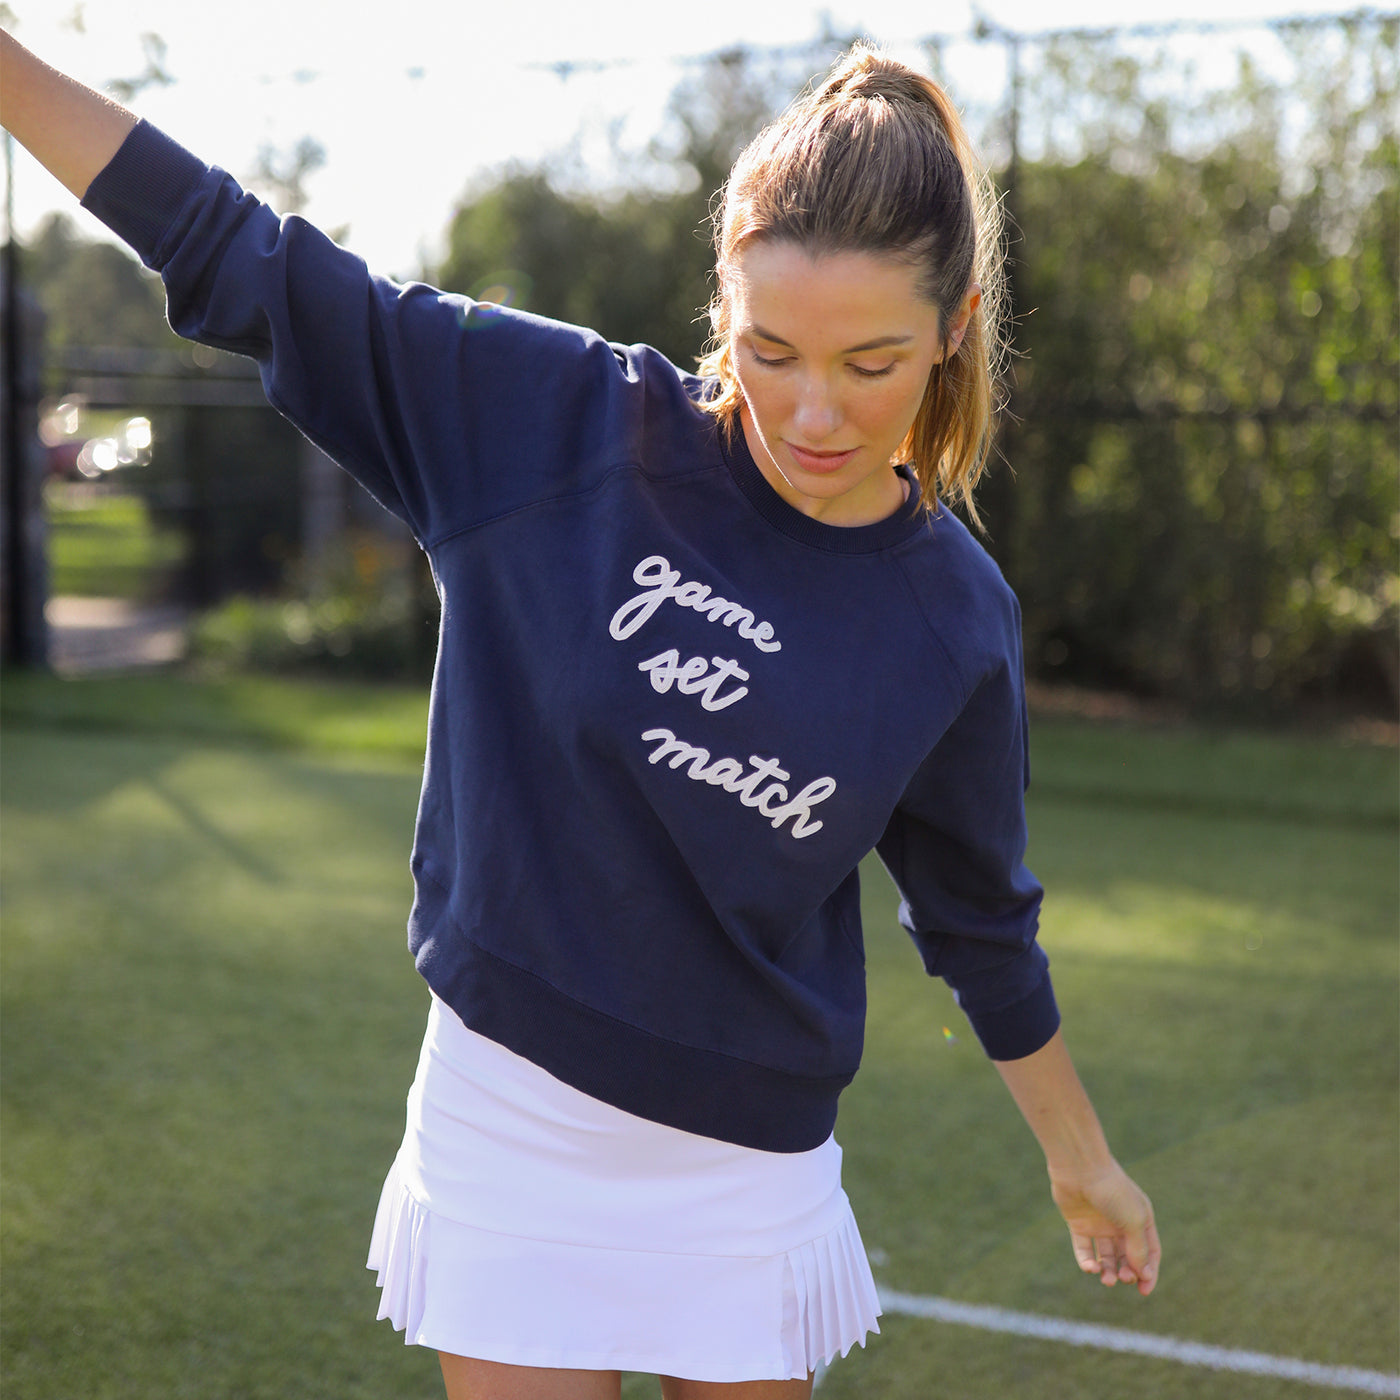 woman stands on tennis court wearing Navy womens sweatshirt lays flats with the text game set match in white cursive font across the front of sweatshirt